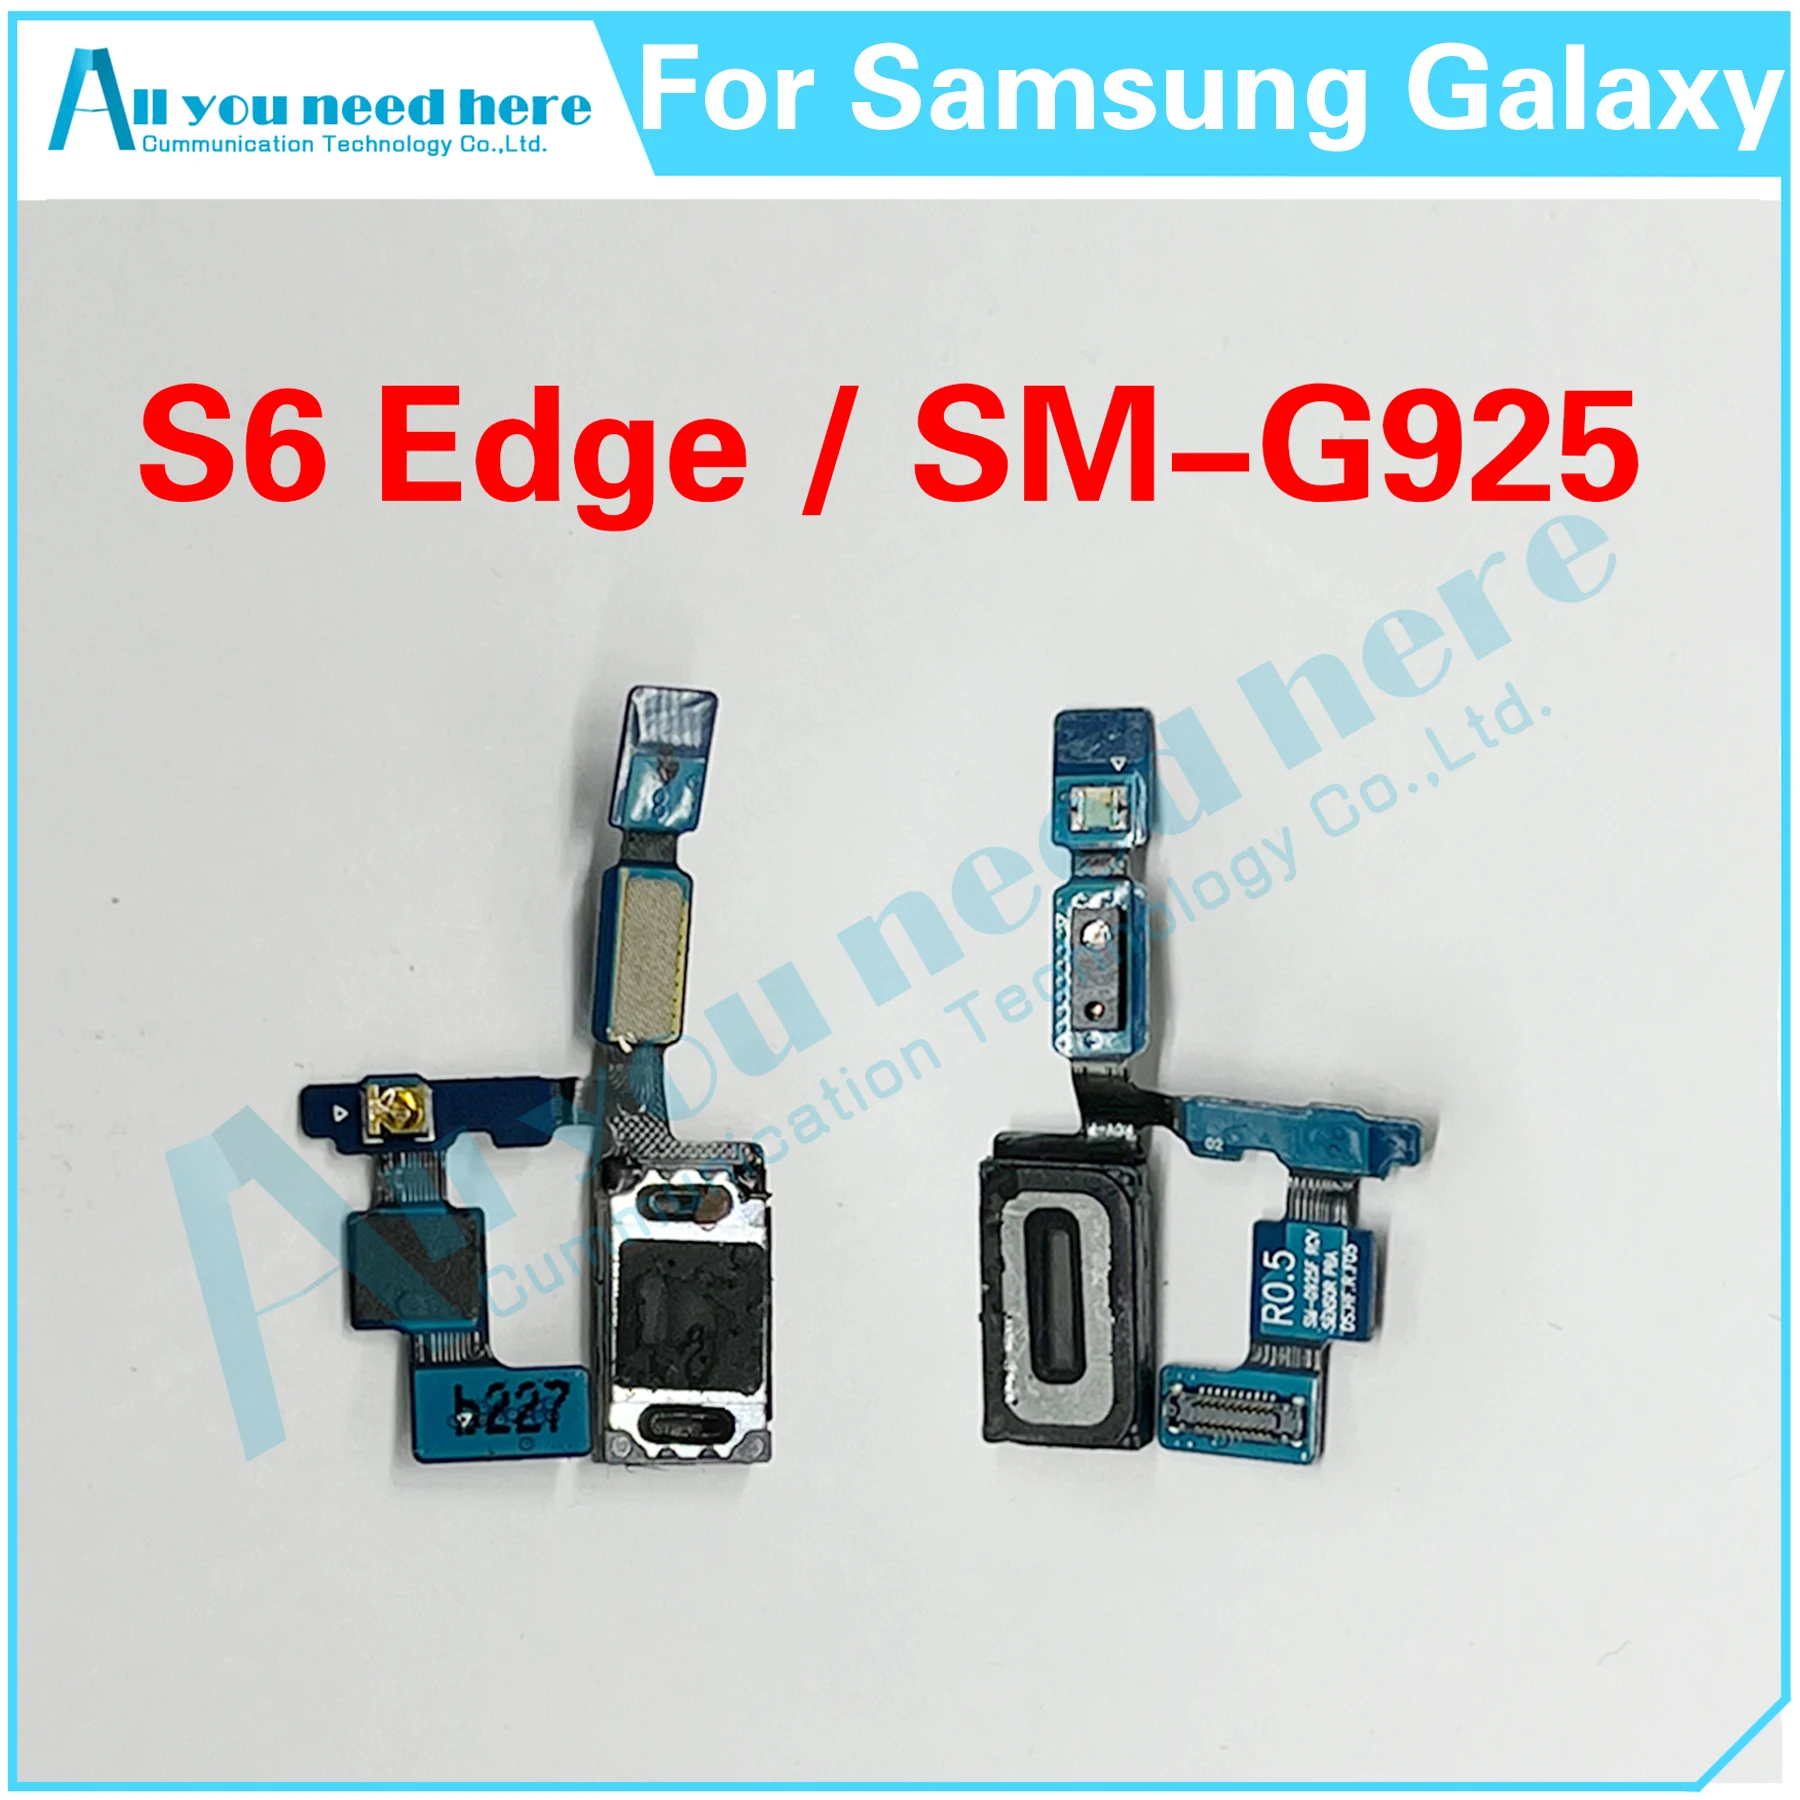 

Audio Jack For Samsung Galaxy S6 Edge SM-G925 G925 G9250 G925A G925F G925I G925L G925K S6Edge Audio Earphone Jack Flex Cable